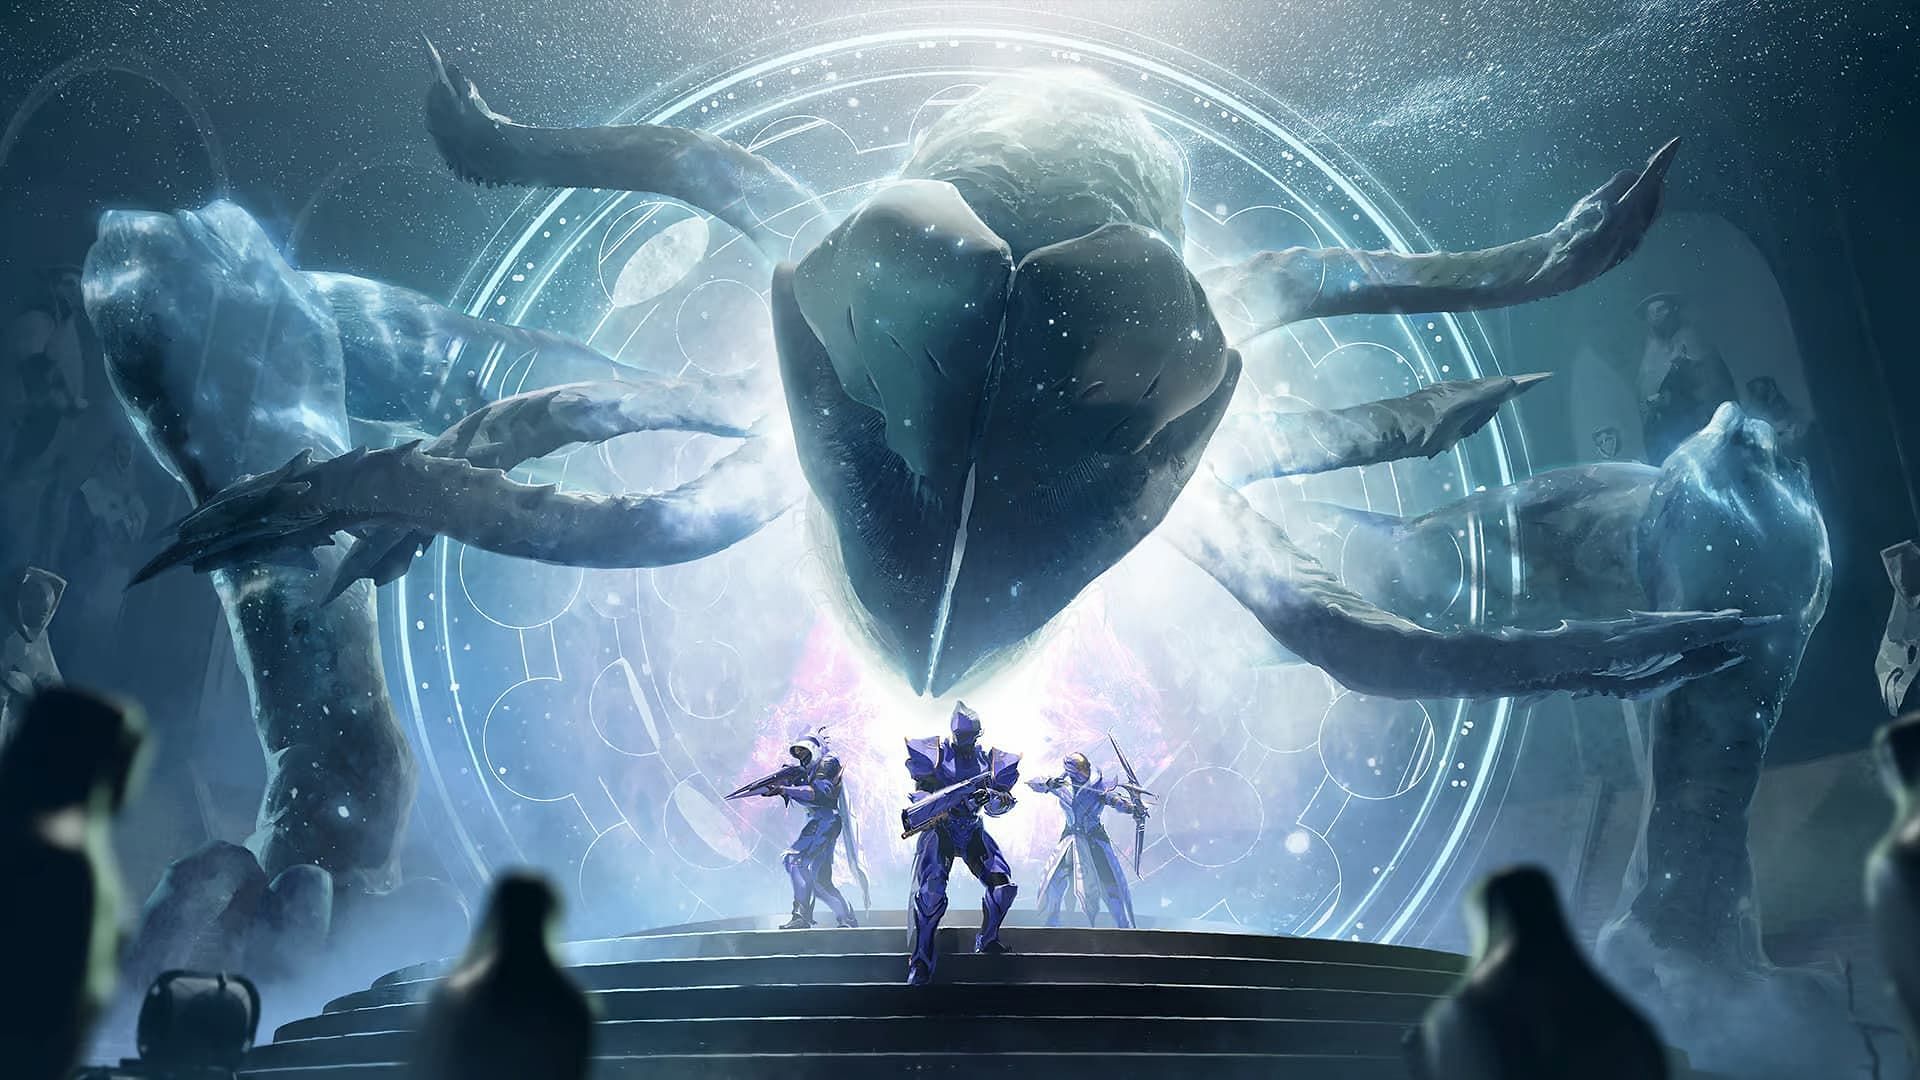 Bungie announces launch of new dungeon ahead of Season of the Wish (Image via Bungie)